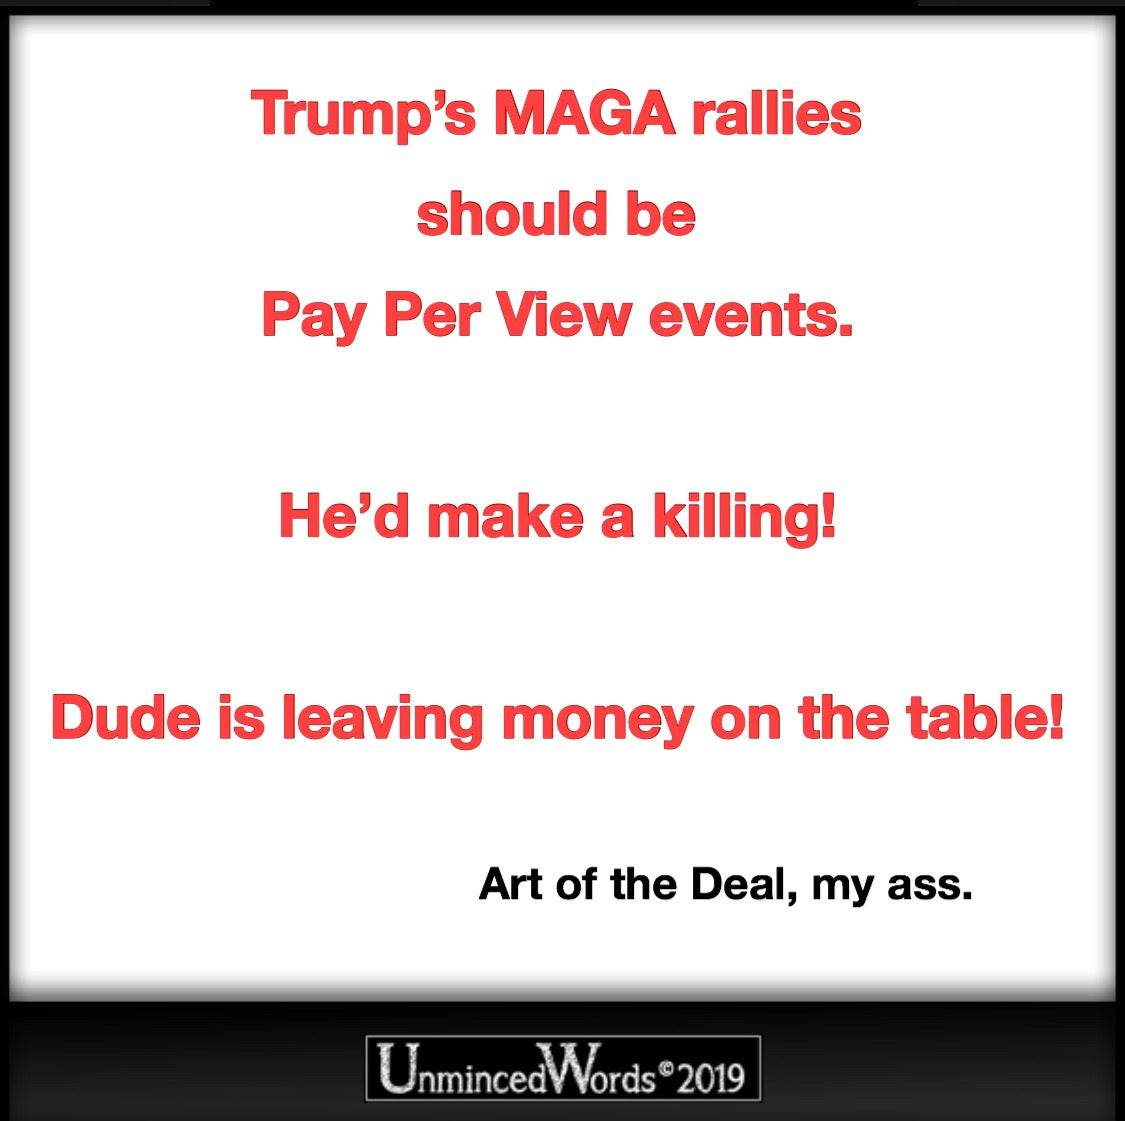 Trump rallies should be Pay Per View